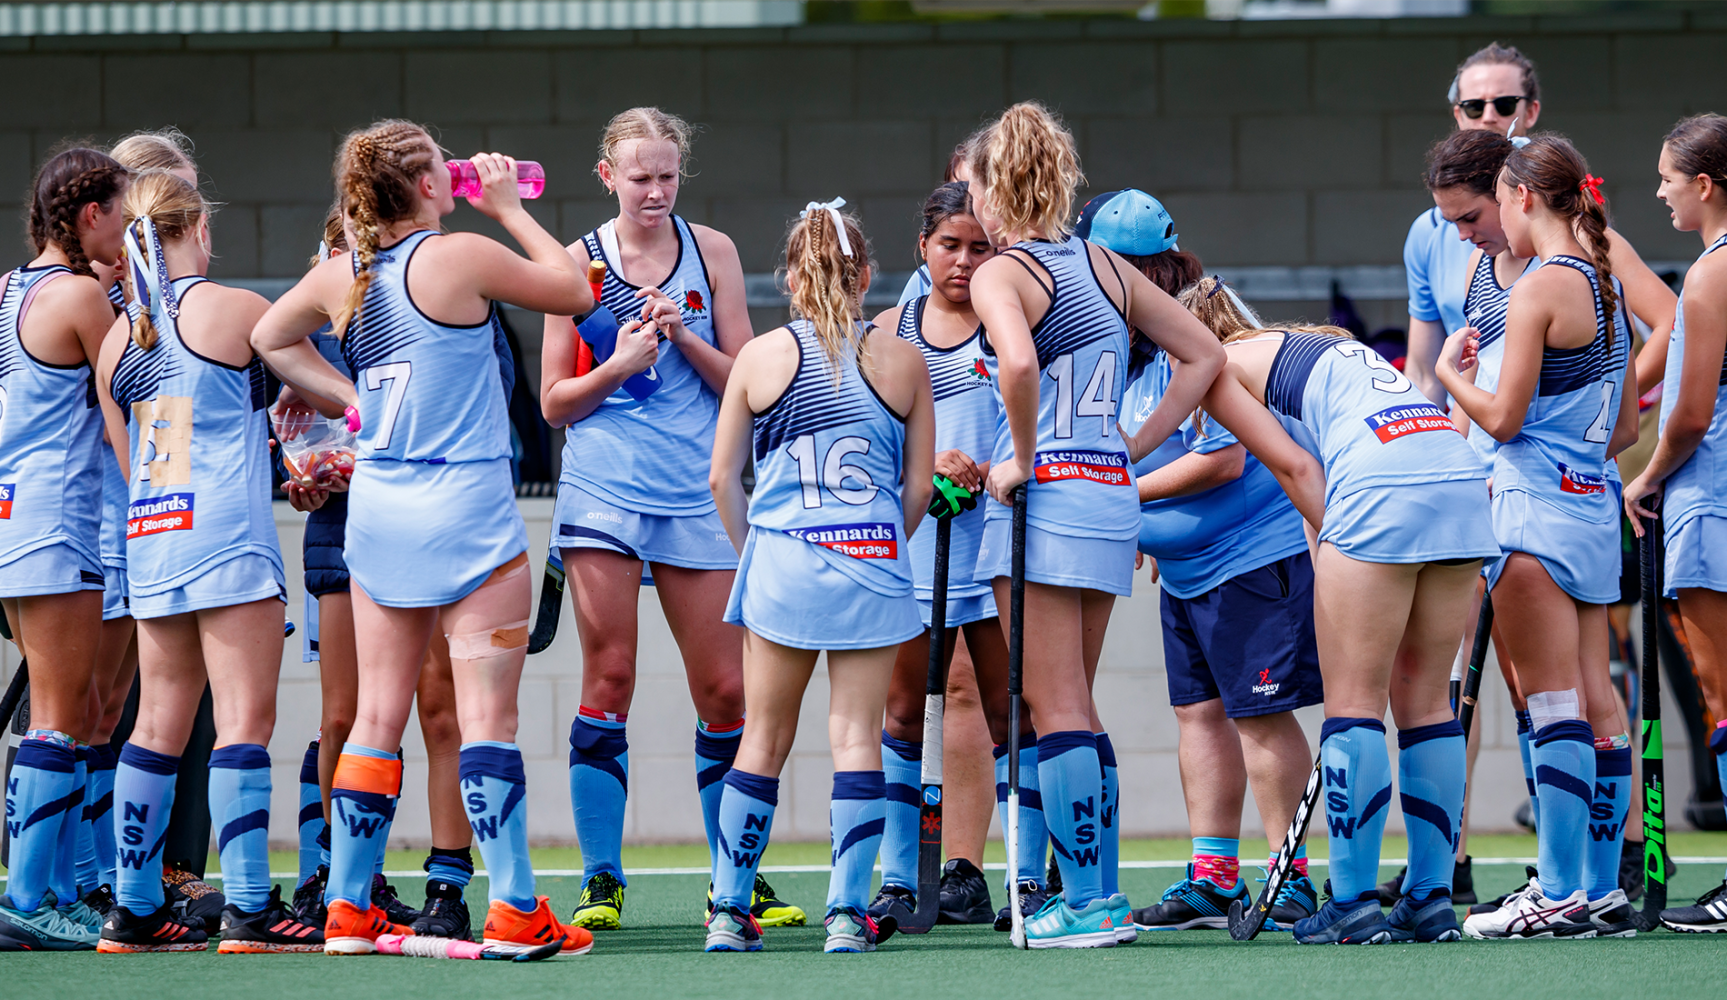 A photograph of the NSW field hockey team during a match break